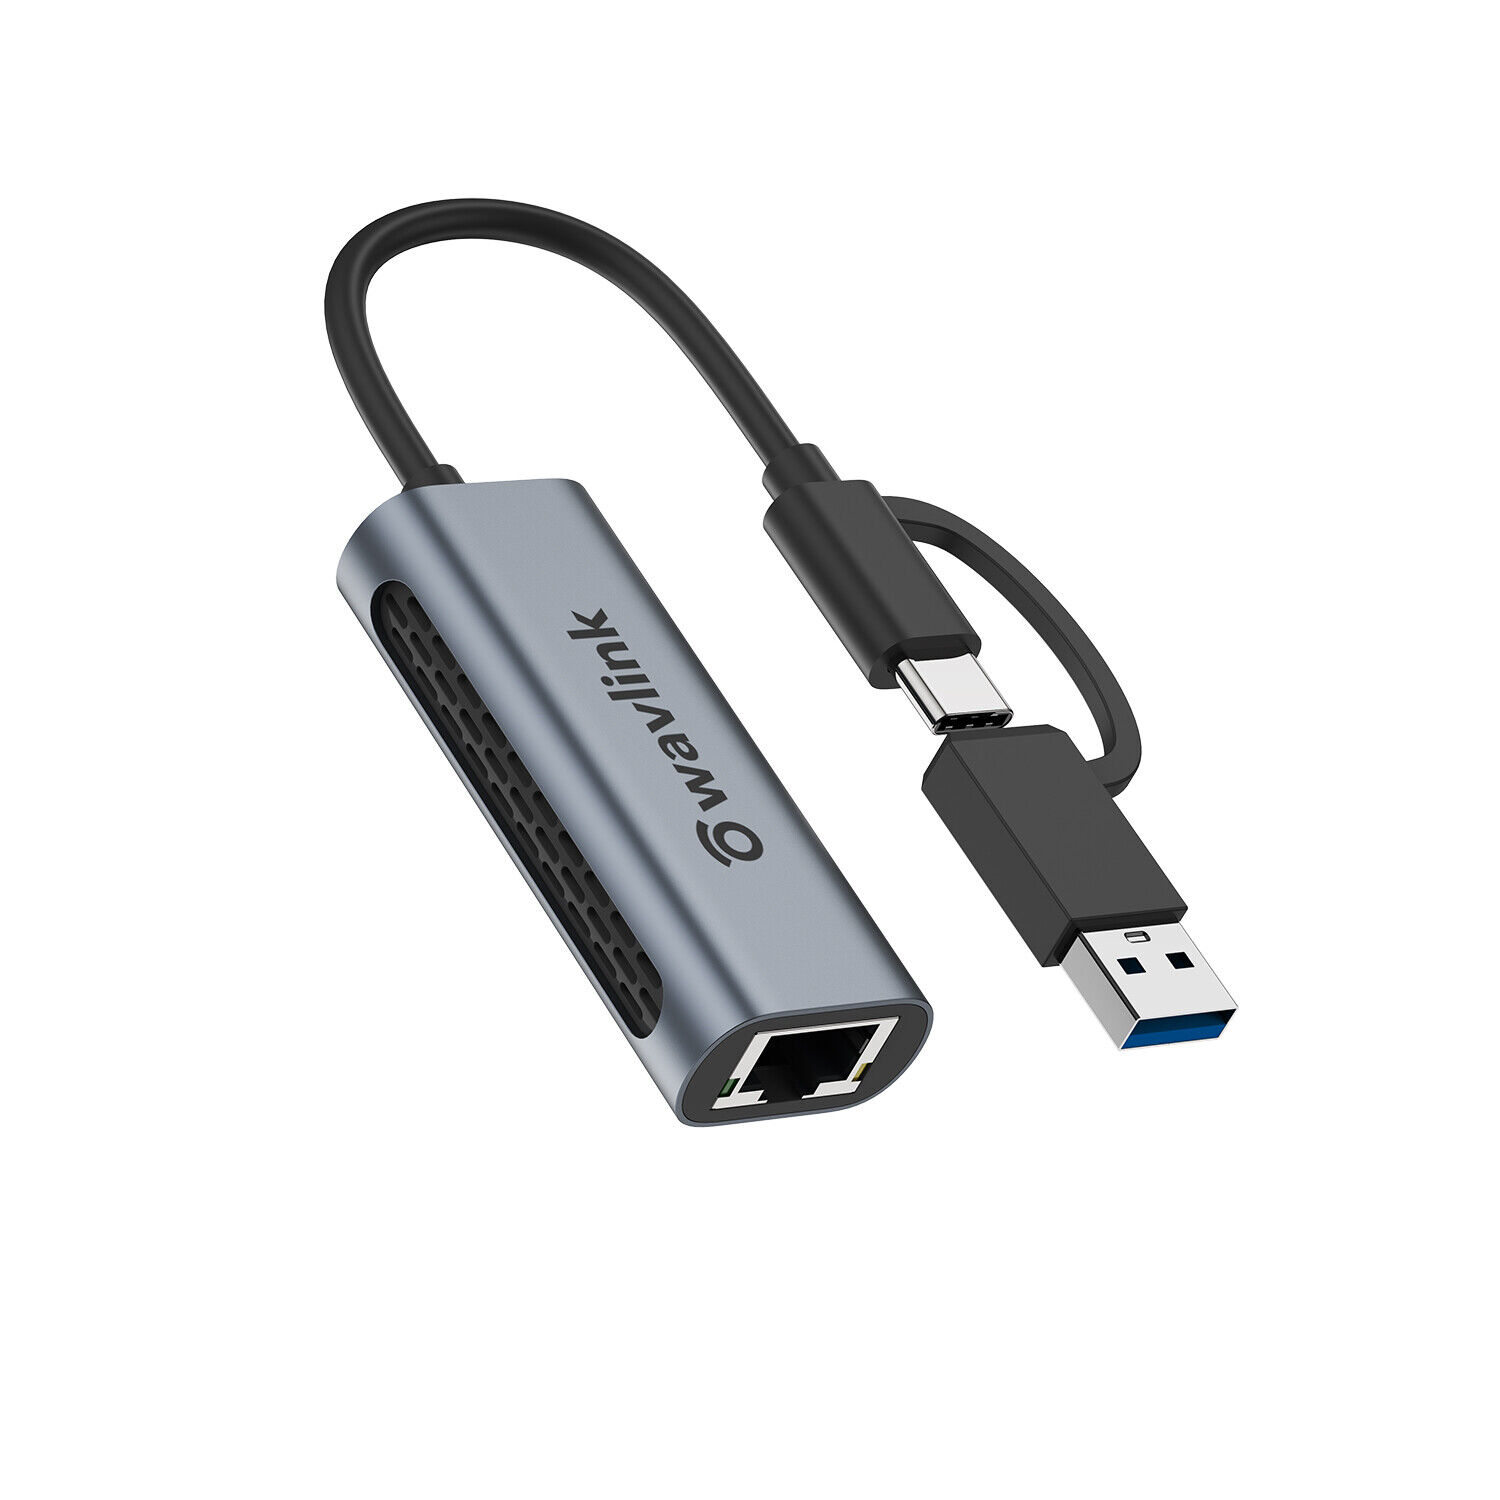 WAVLINK USB to 2.5G Ethernet Adapter 2-in-1 USB C/USB 3.0 Ethernet Adapter